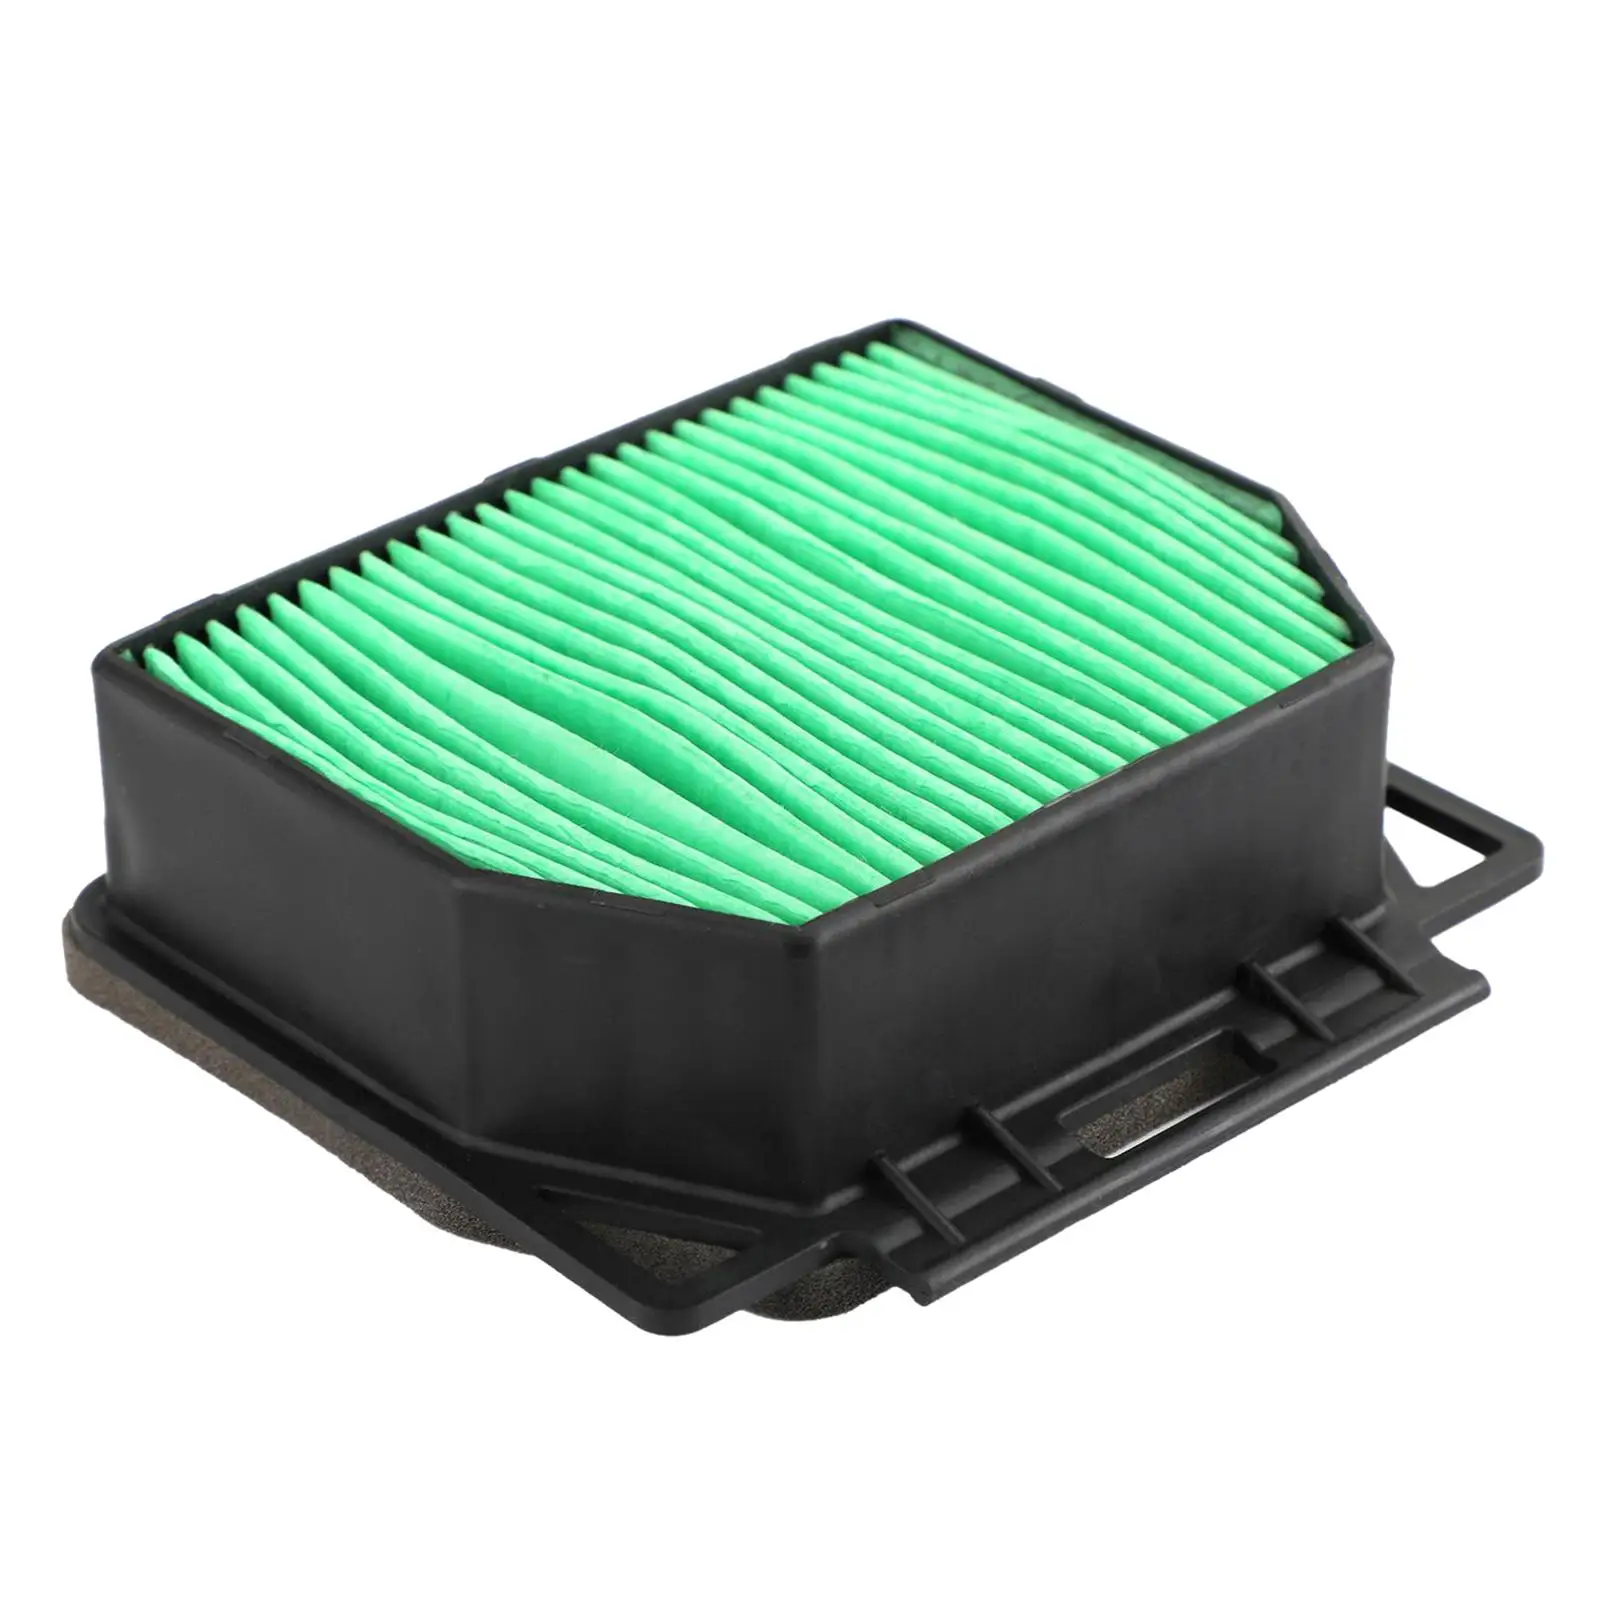 Air Filter for   R  F125 F250 R 300R F 120 2018 2019 2020 Accessories